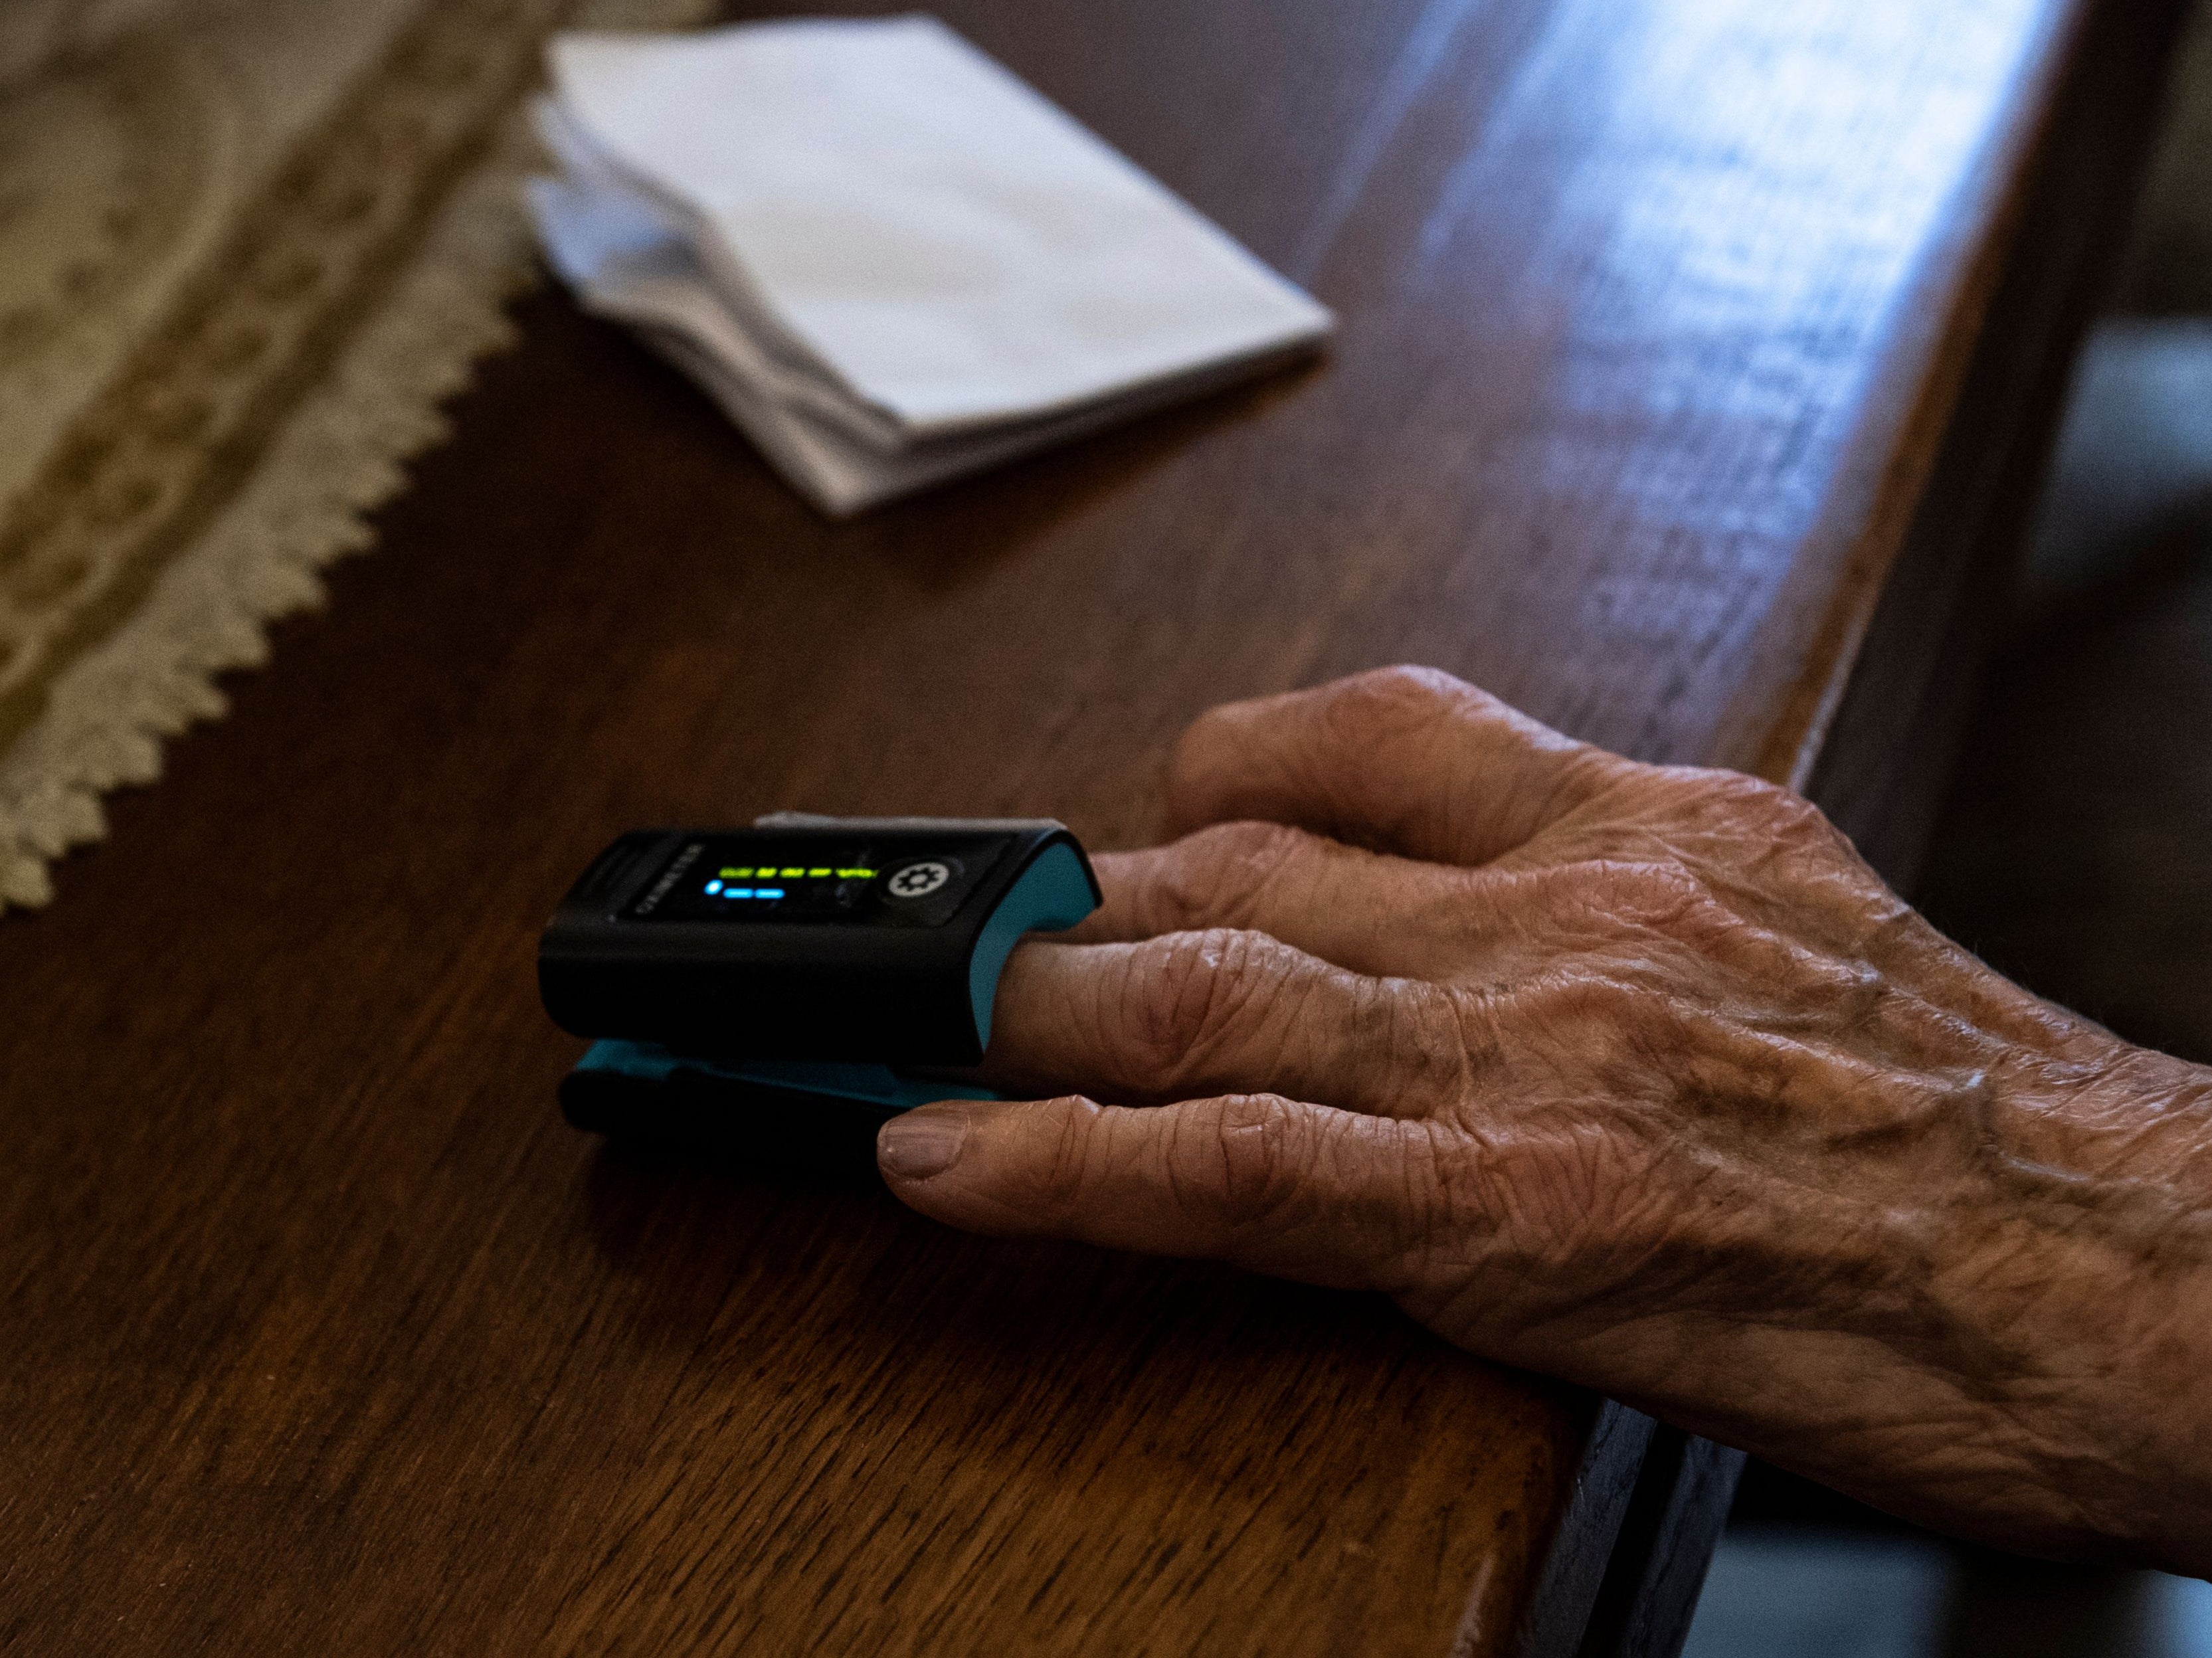 Concerns come at a time when Covid-19 has transformed the face of at-home healthcare, bringing testing into the home